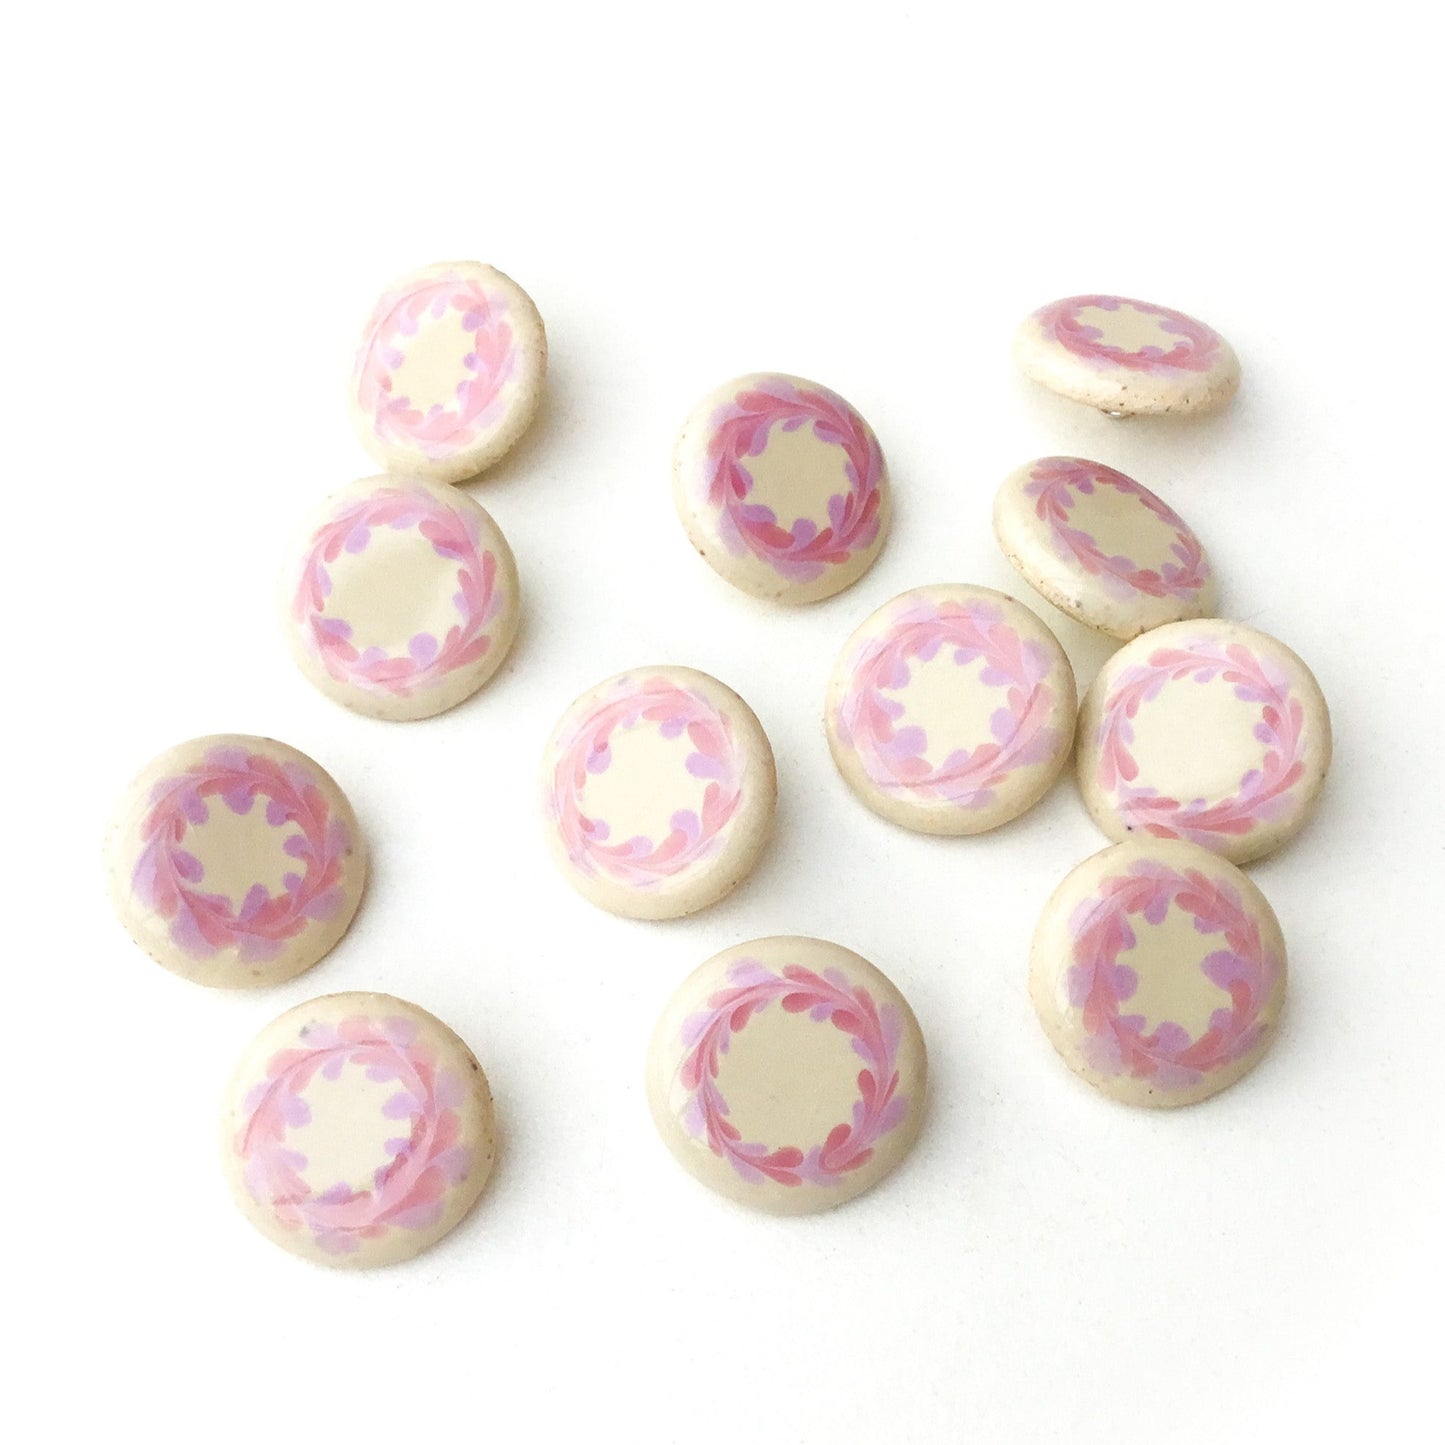 Antique White & Pink Wreath Ceramic Shank Buttons - 11/16"